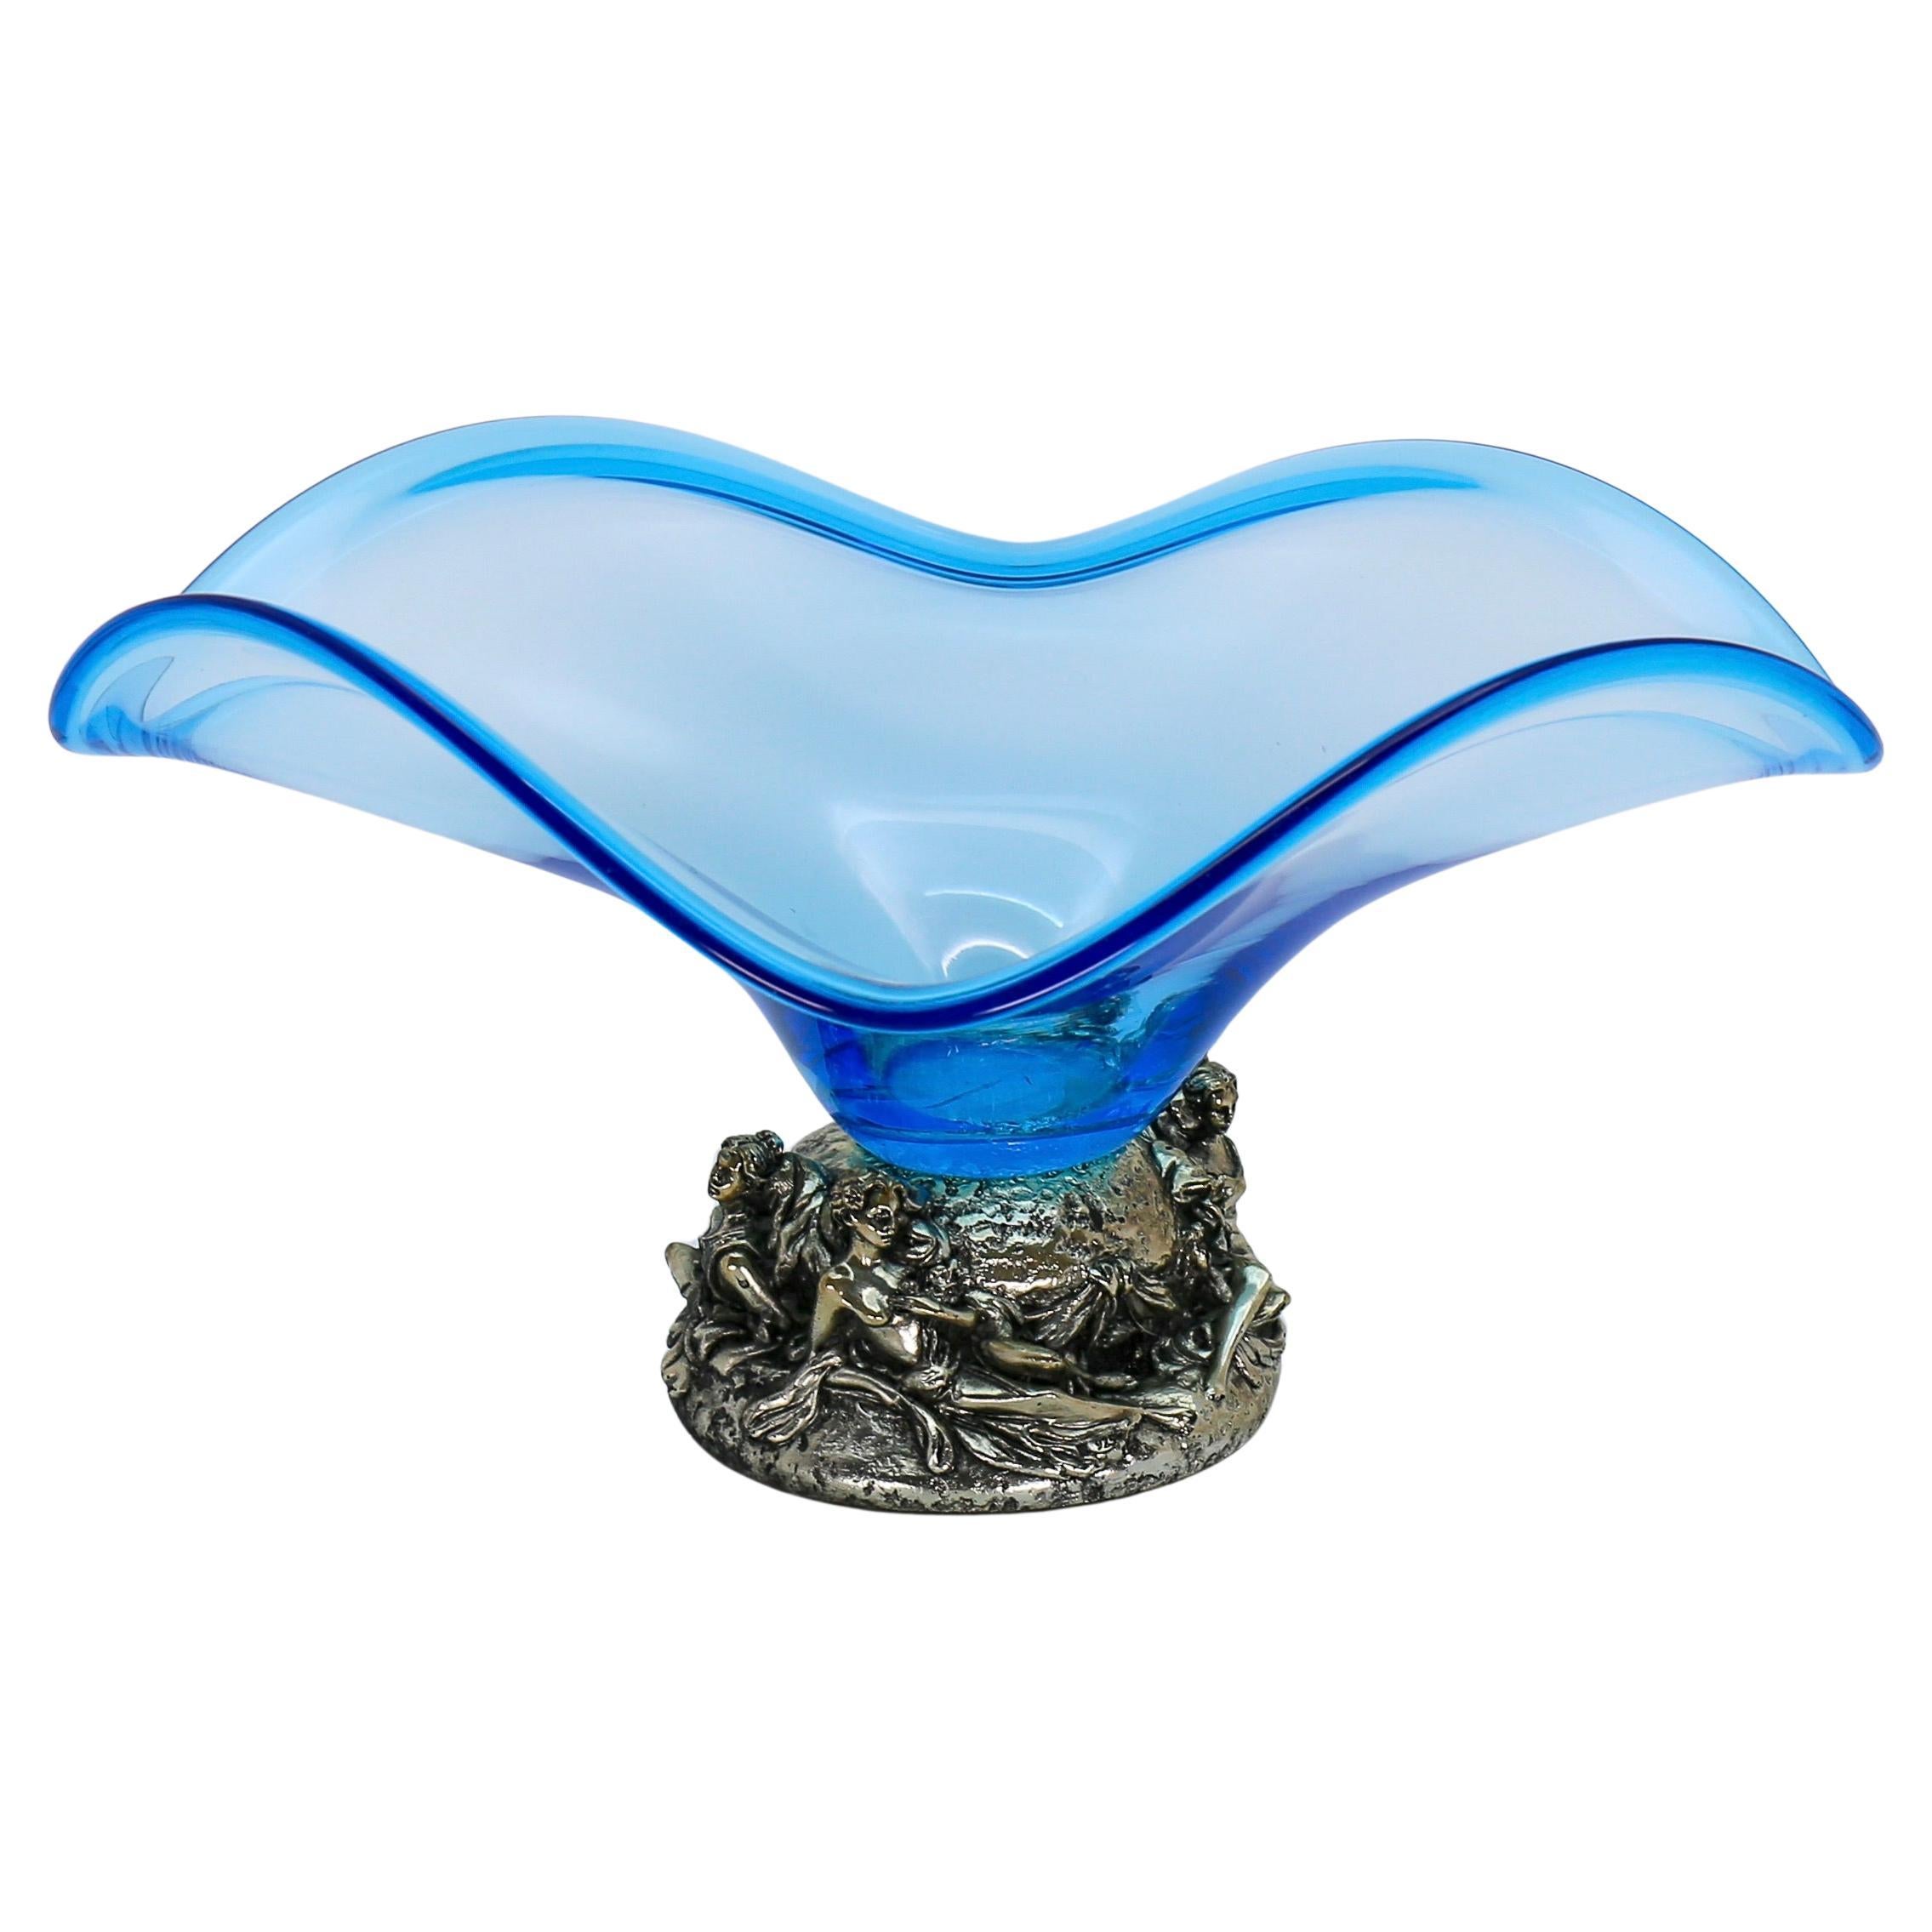 Elegant La Meridiana Murano Glass Bowl on Silver Base with 4 Relaxing Woman For Sale